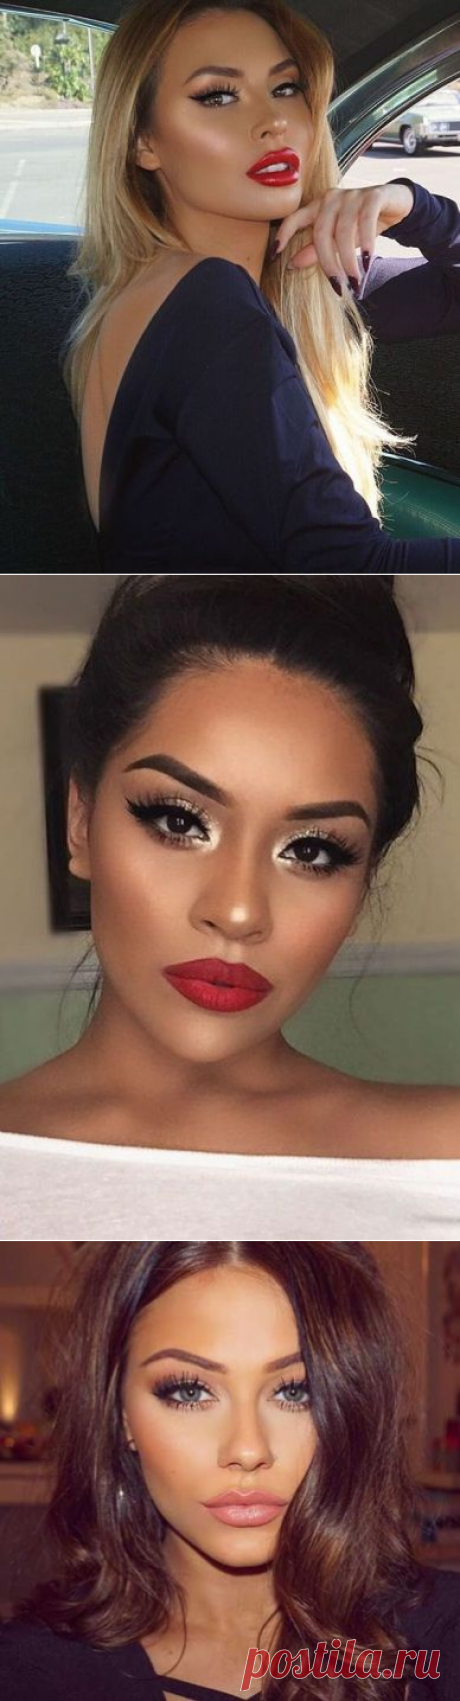 The Sexiest Makeup Ideas For Valentine’s Day This Year - Resouri